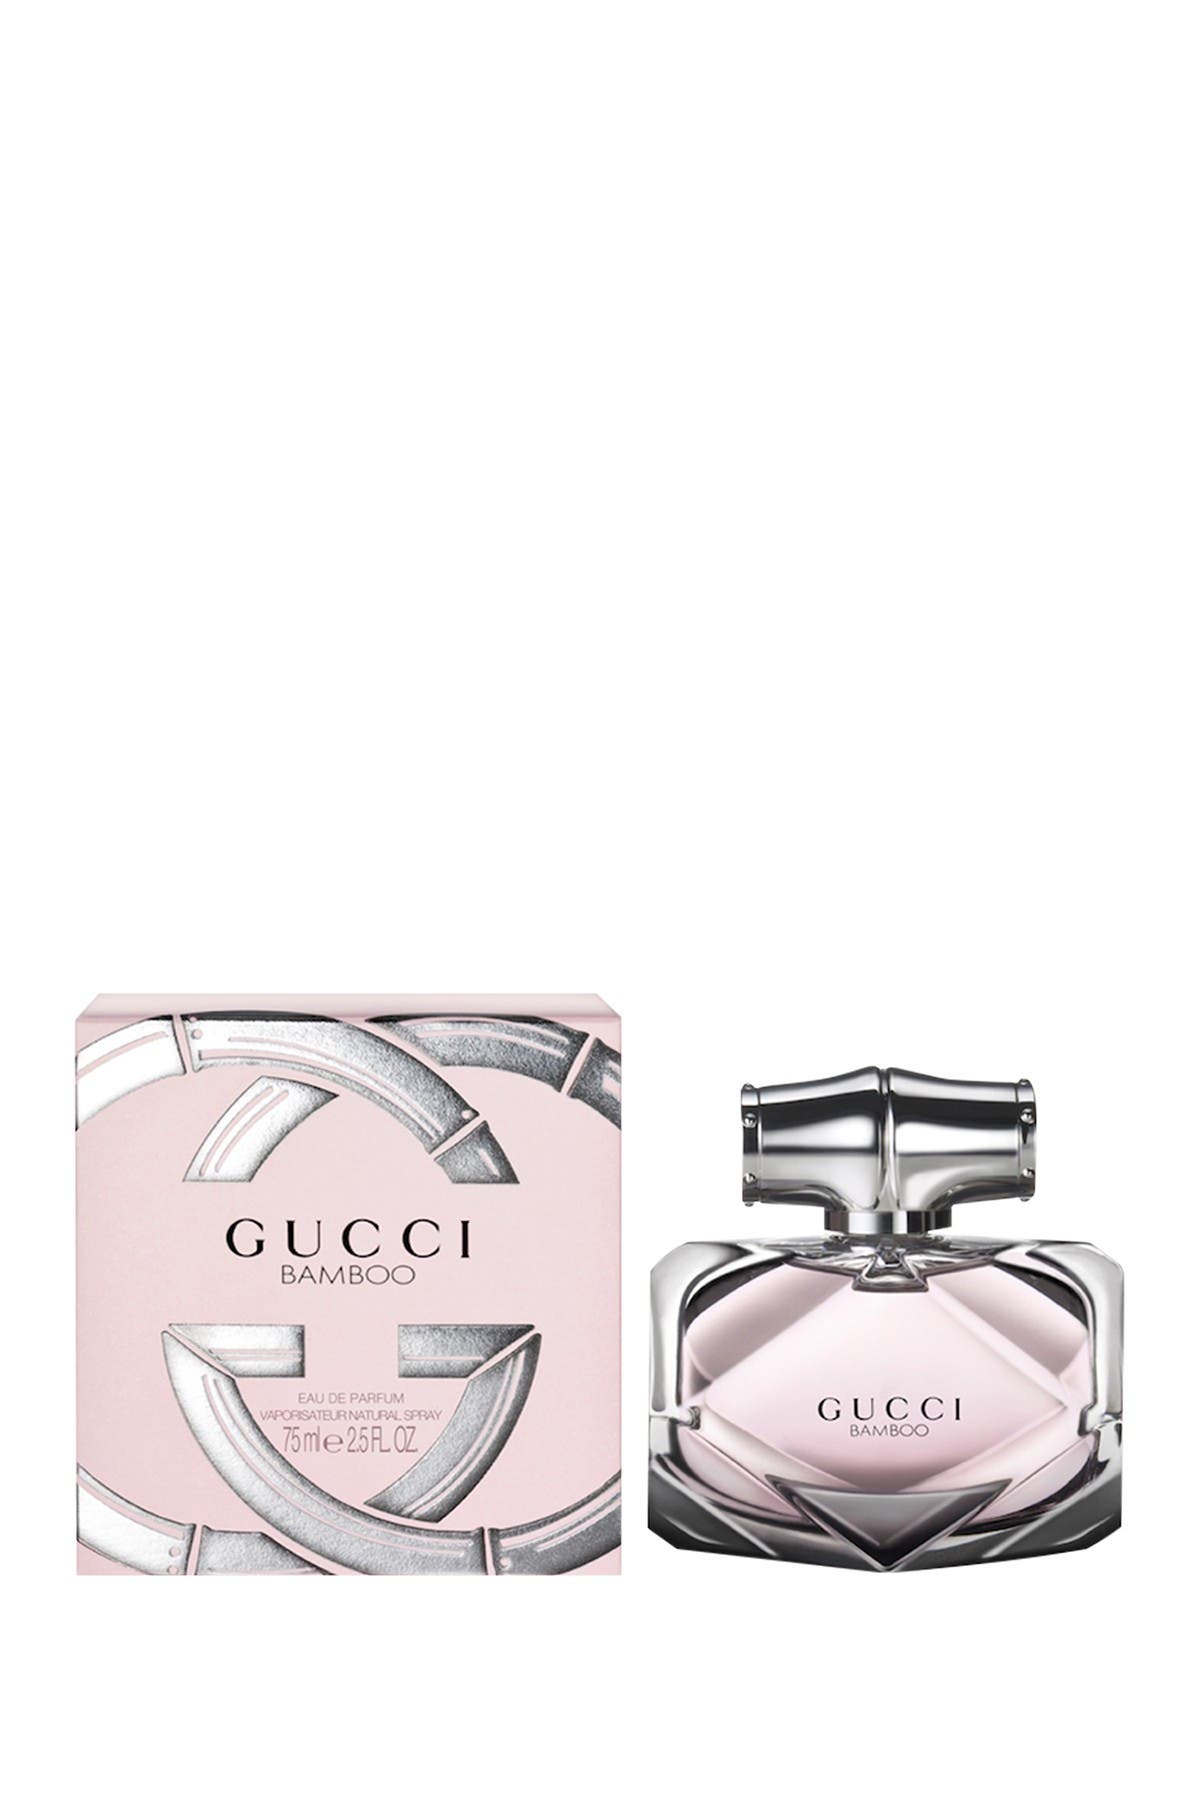 gucci bamboo nordstrom